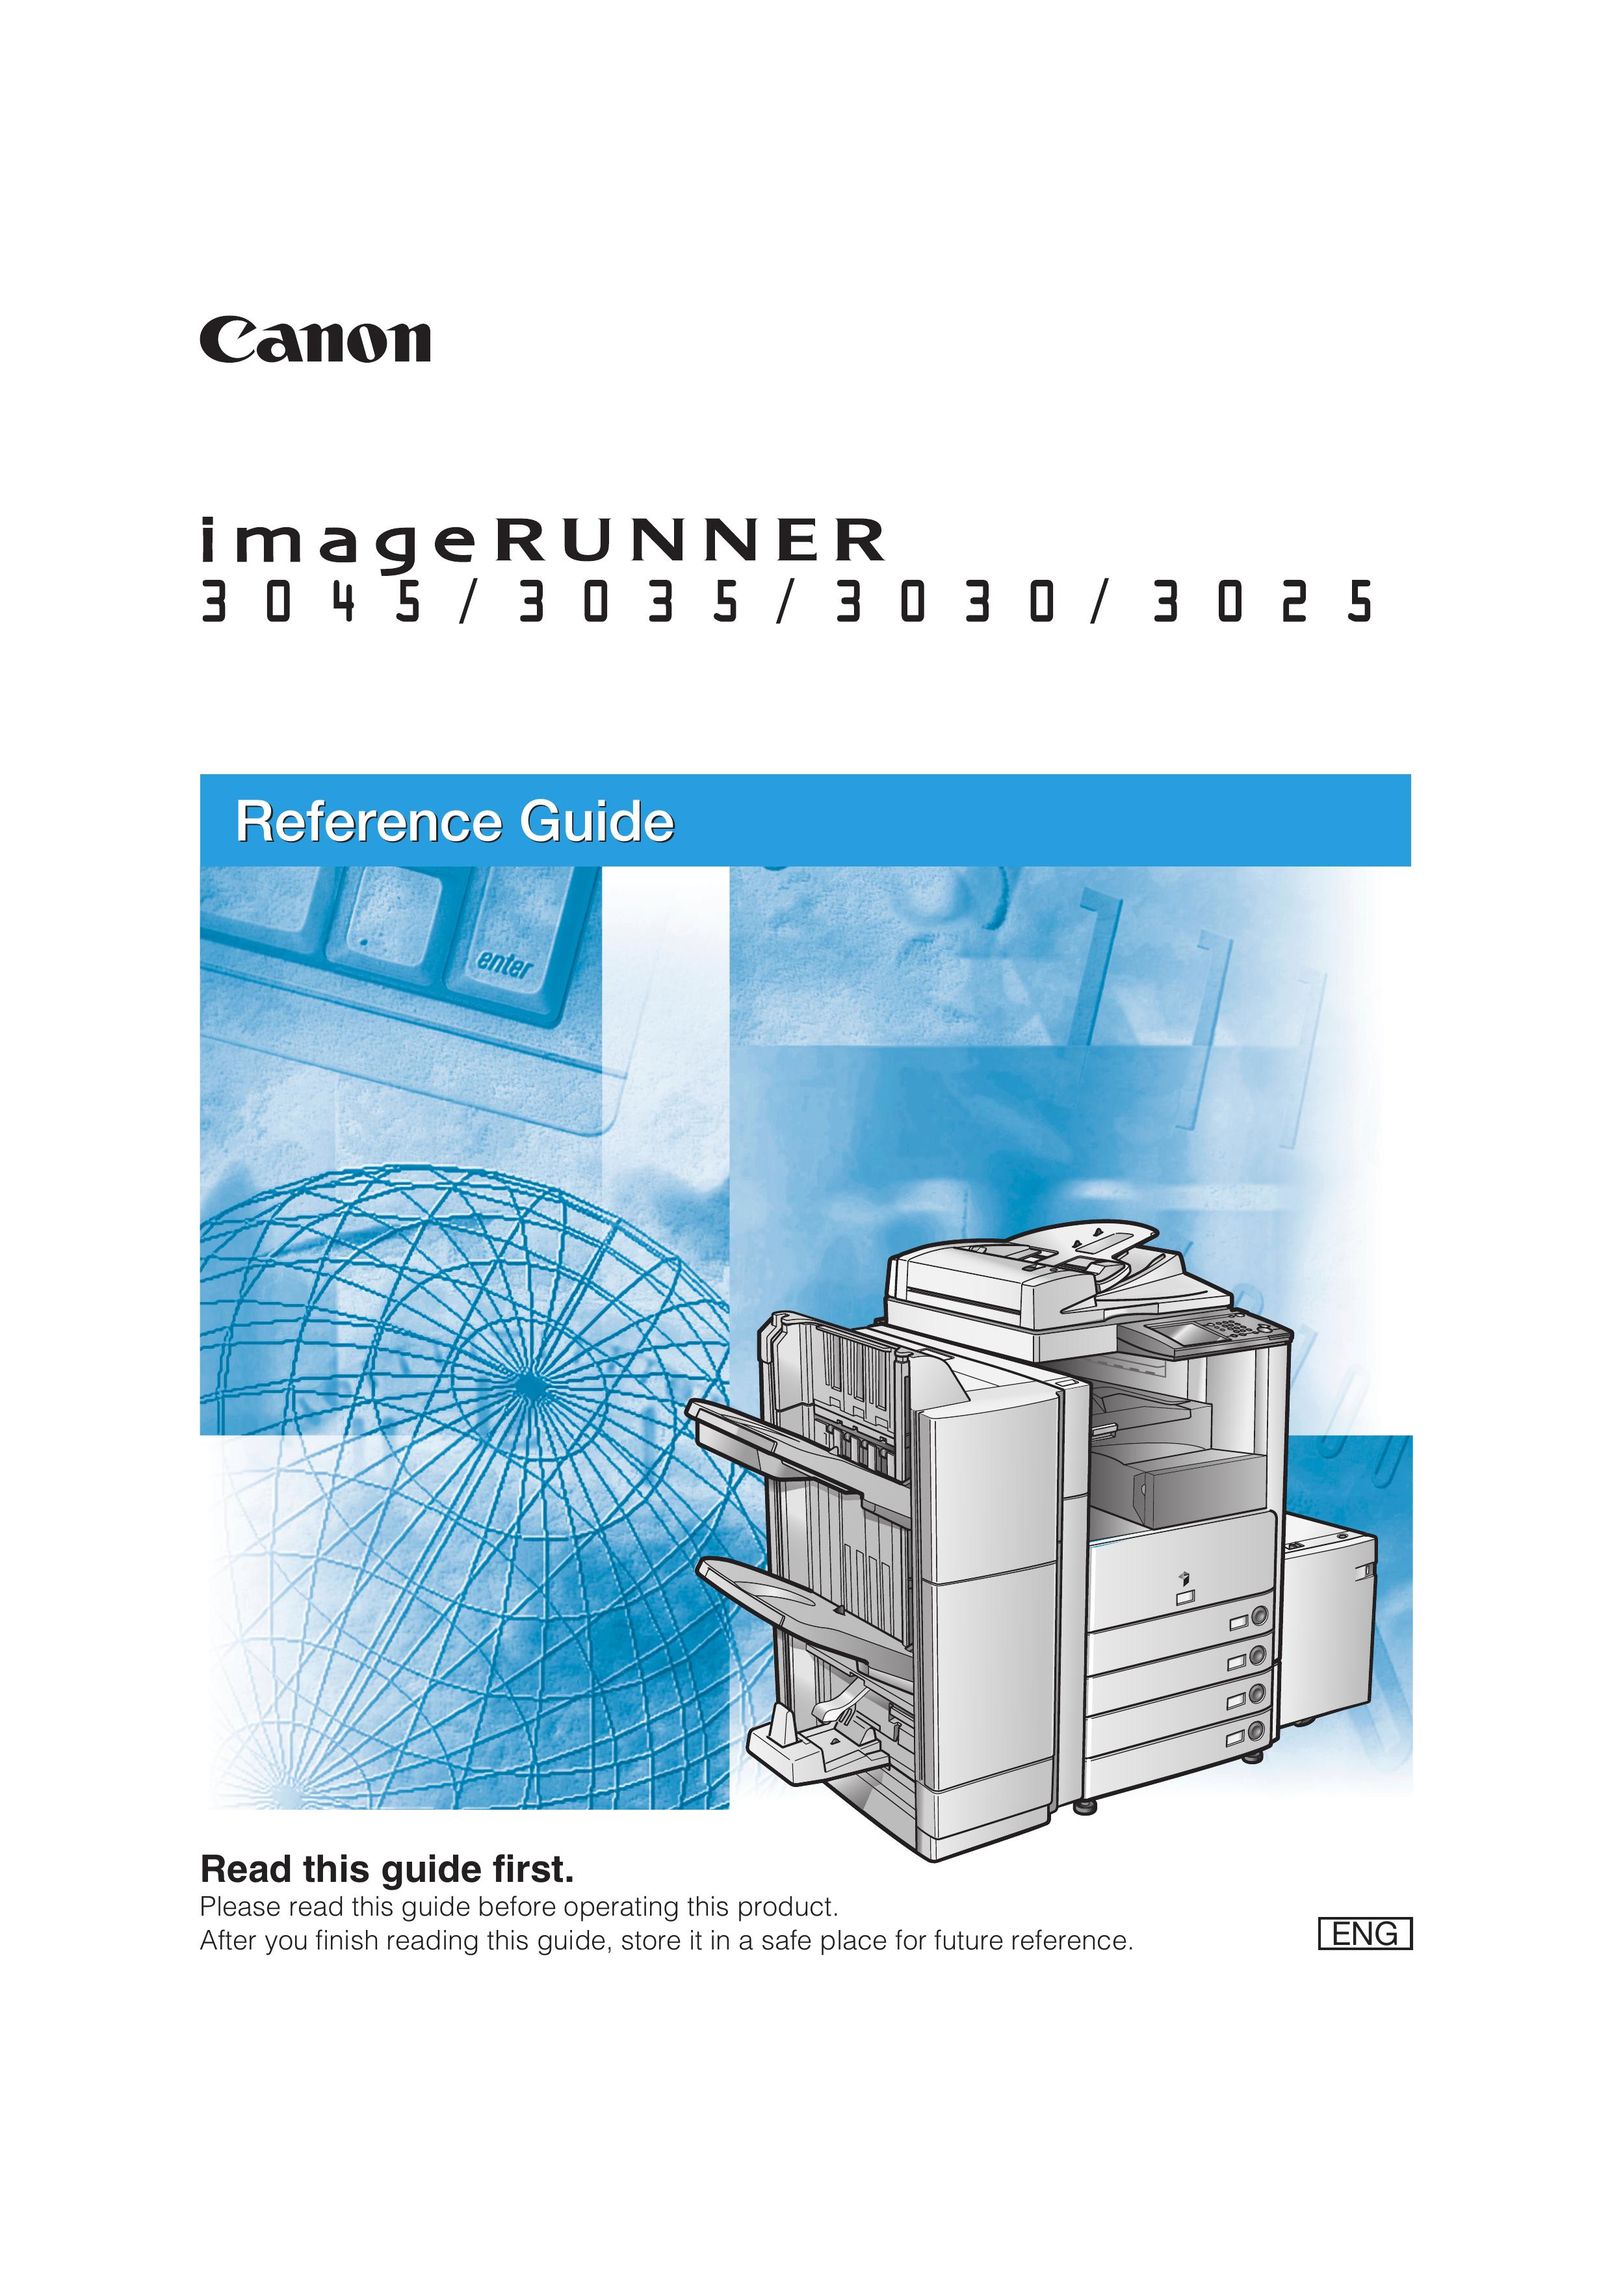 Canon 3035 All in One Printer User Manual